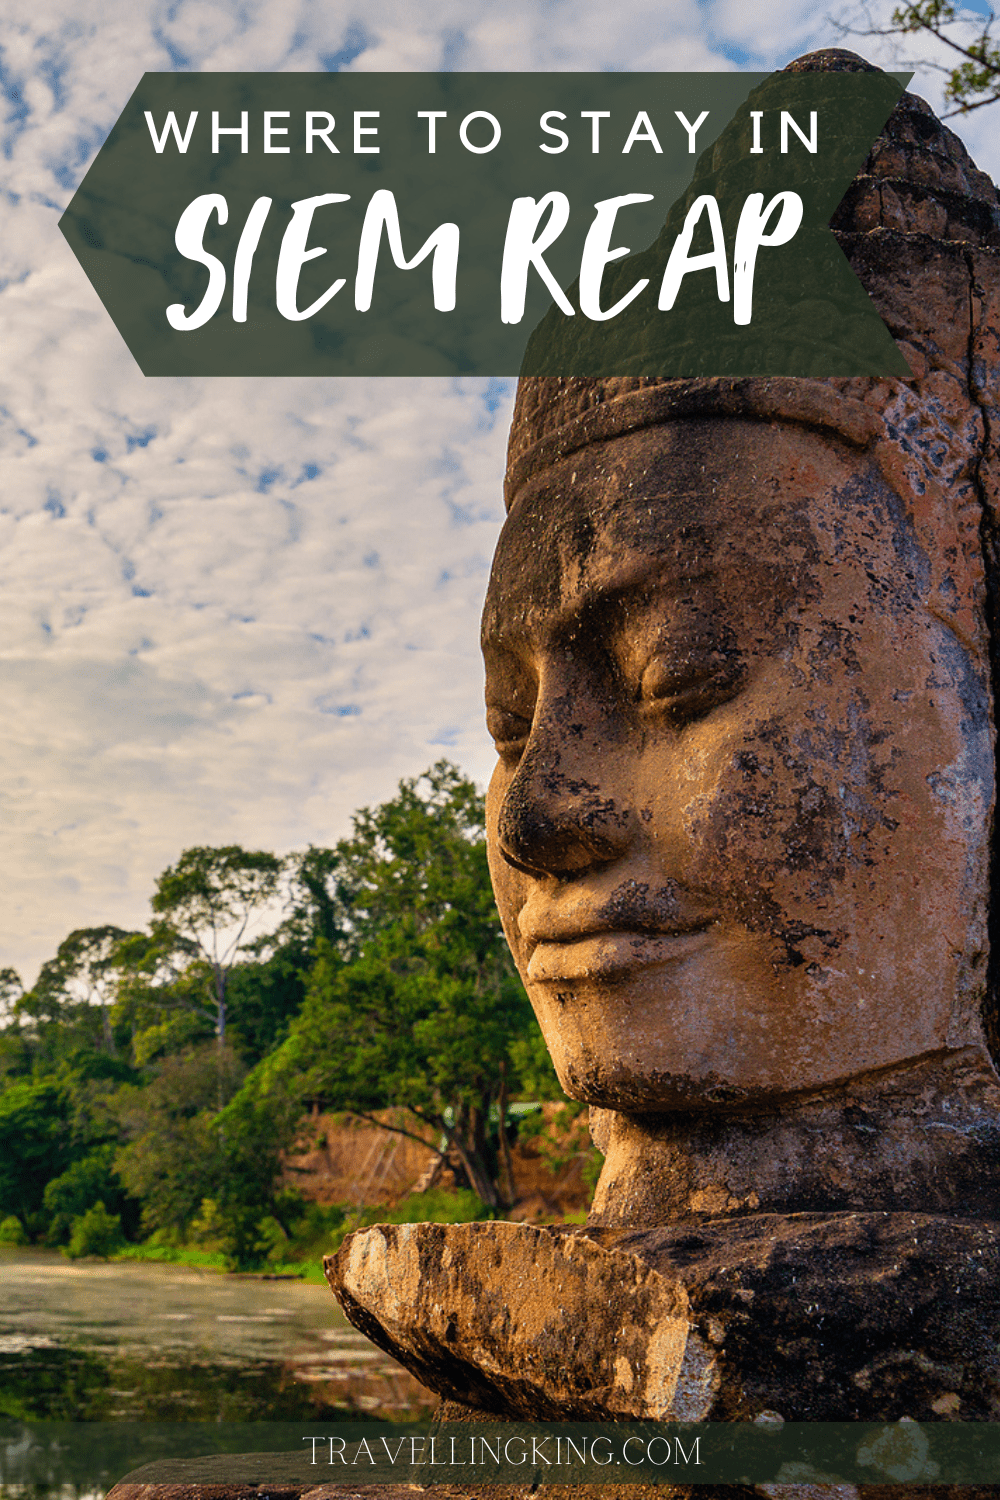 Where to stay in Siem Reap